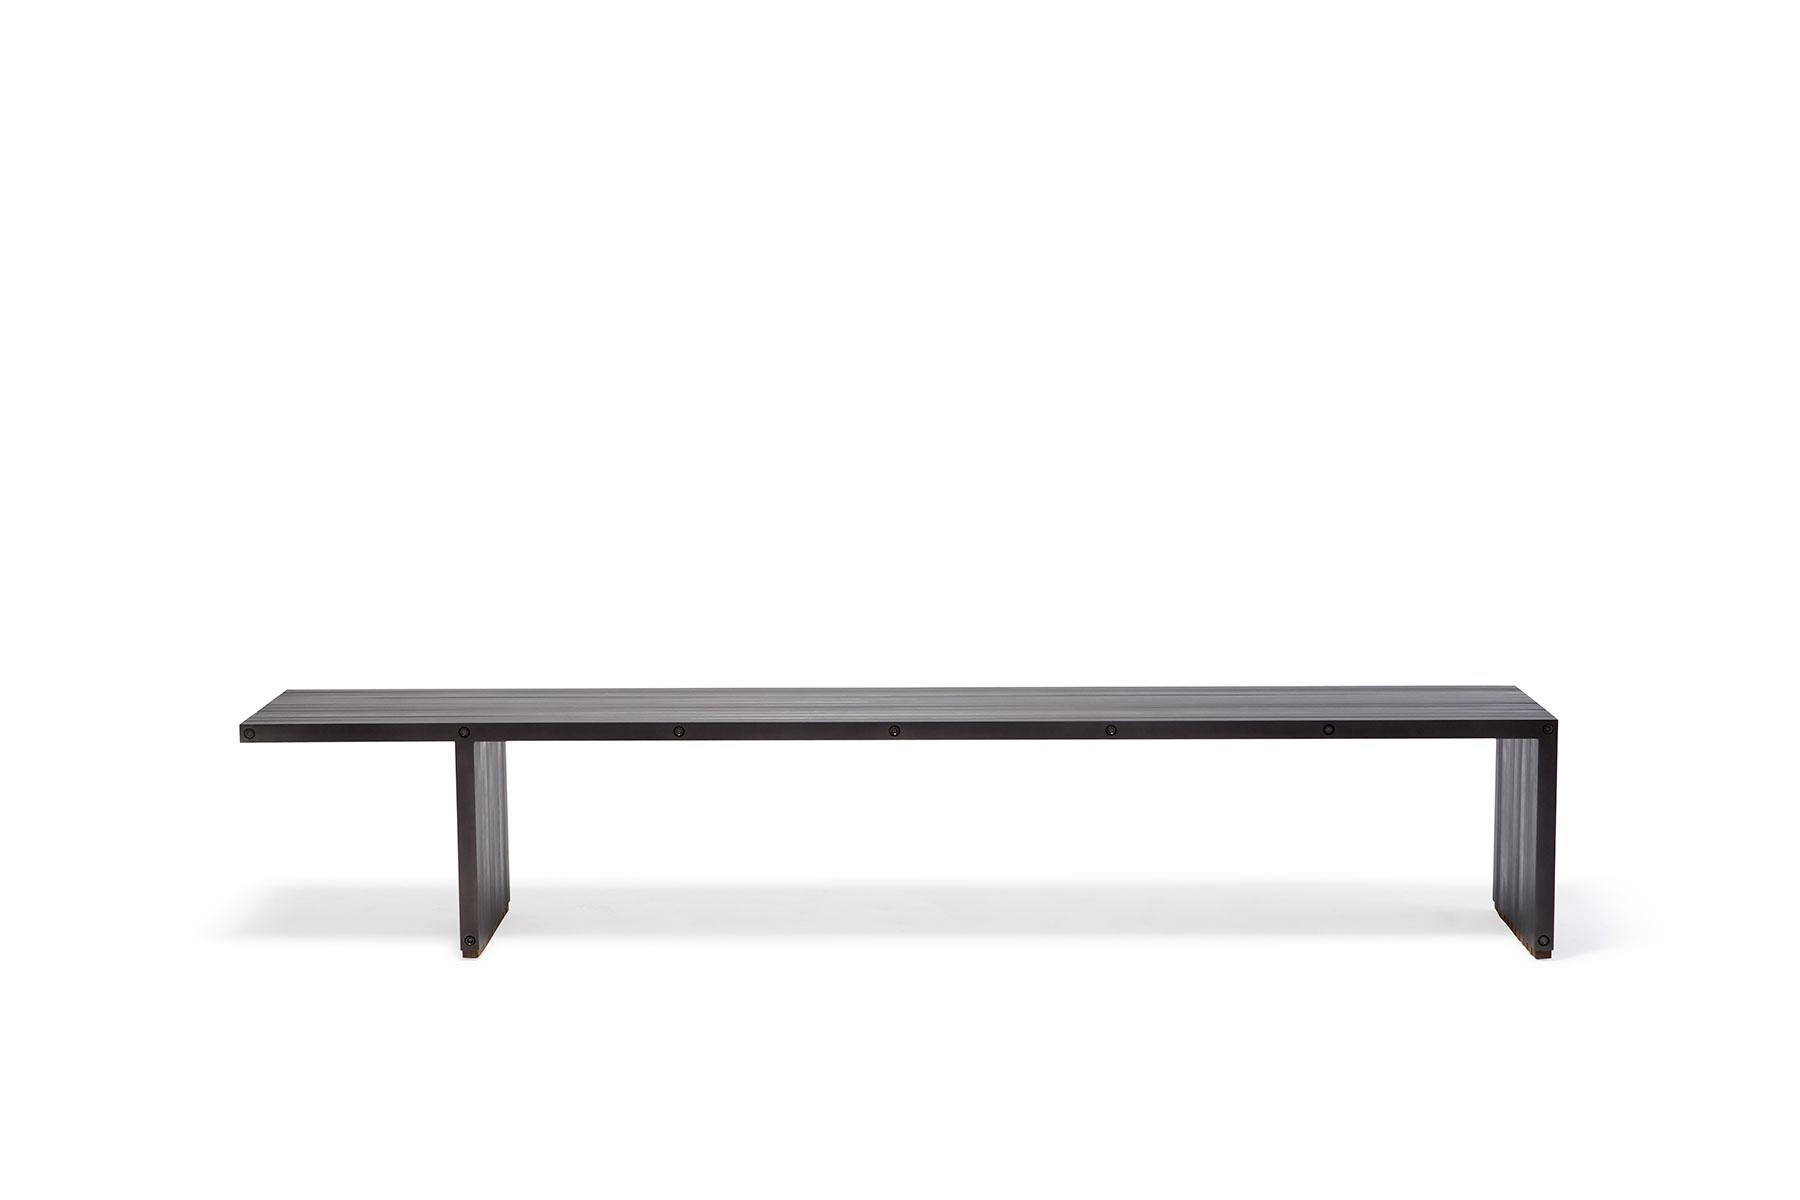 The Compression bench by Stephen Kenn is a celebration of simplicity and strength. The bars are held together without nails or welds, but through compression along steel rods. The Compression Bench can be paired with the matching Compression Table